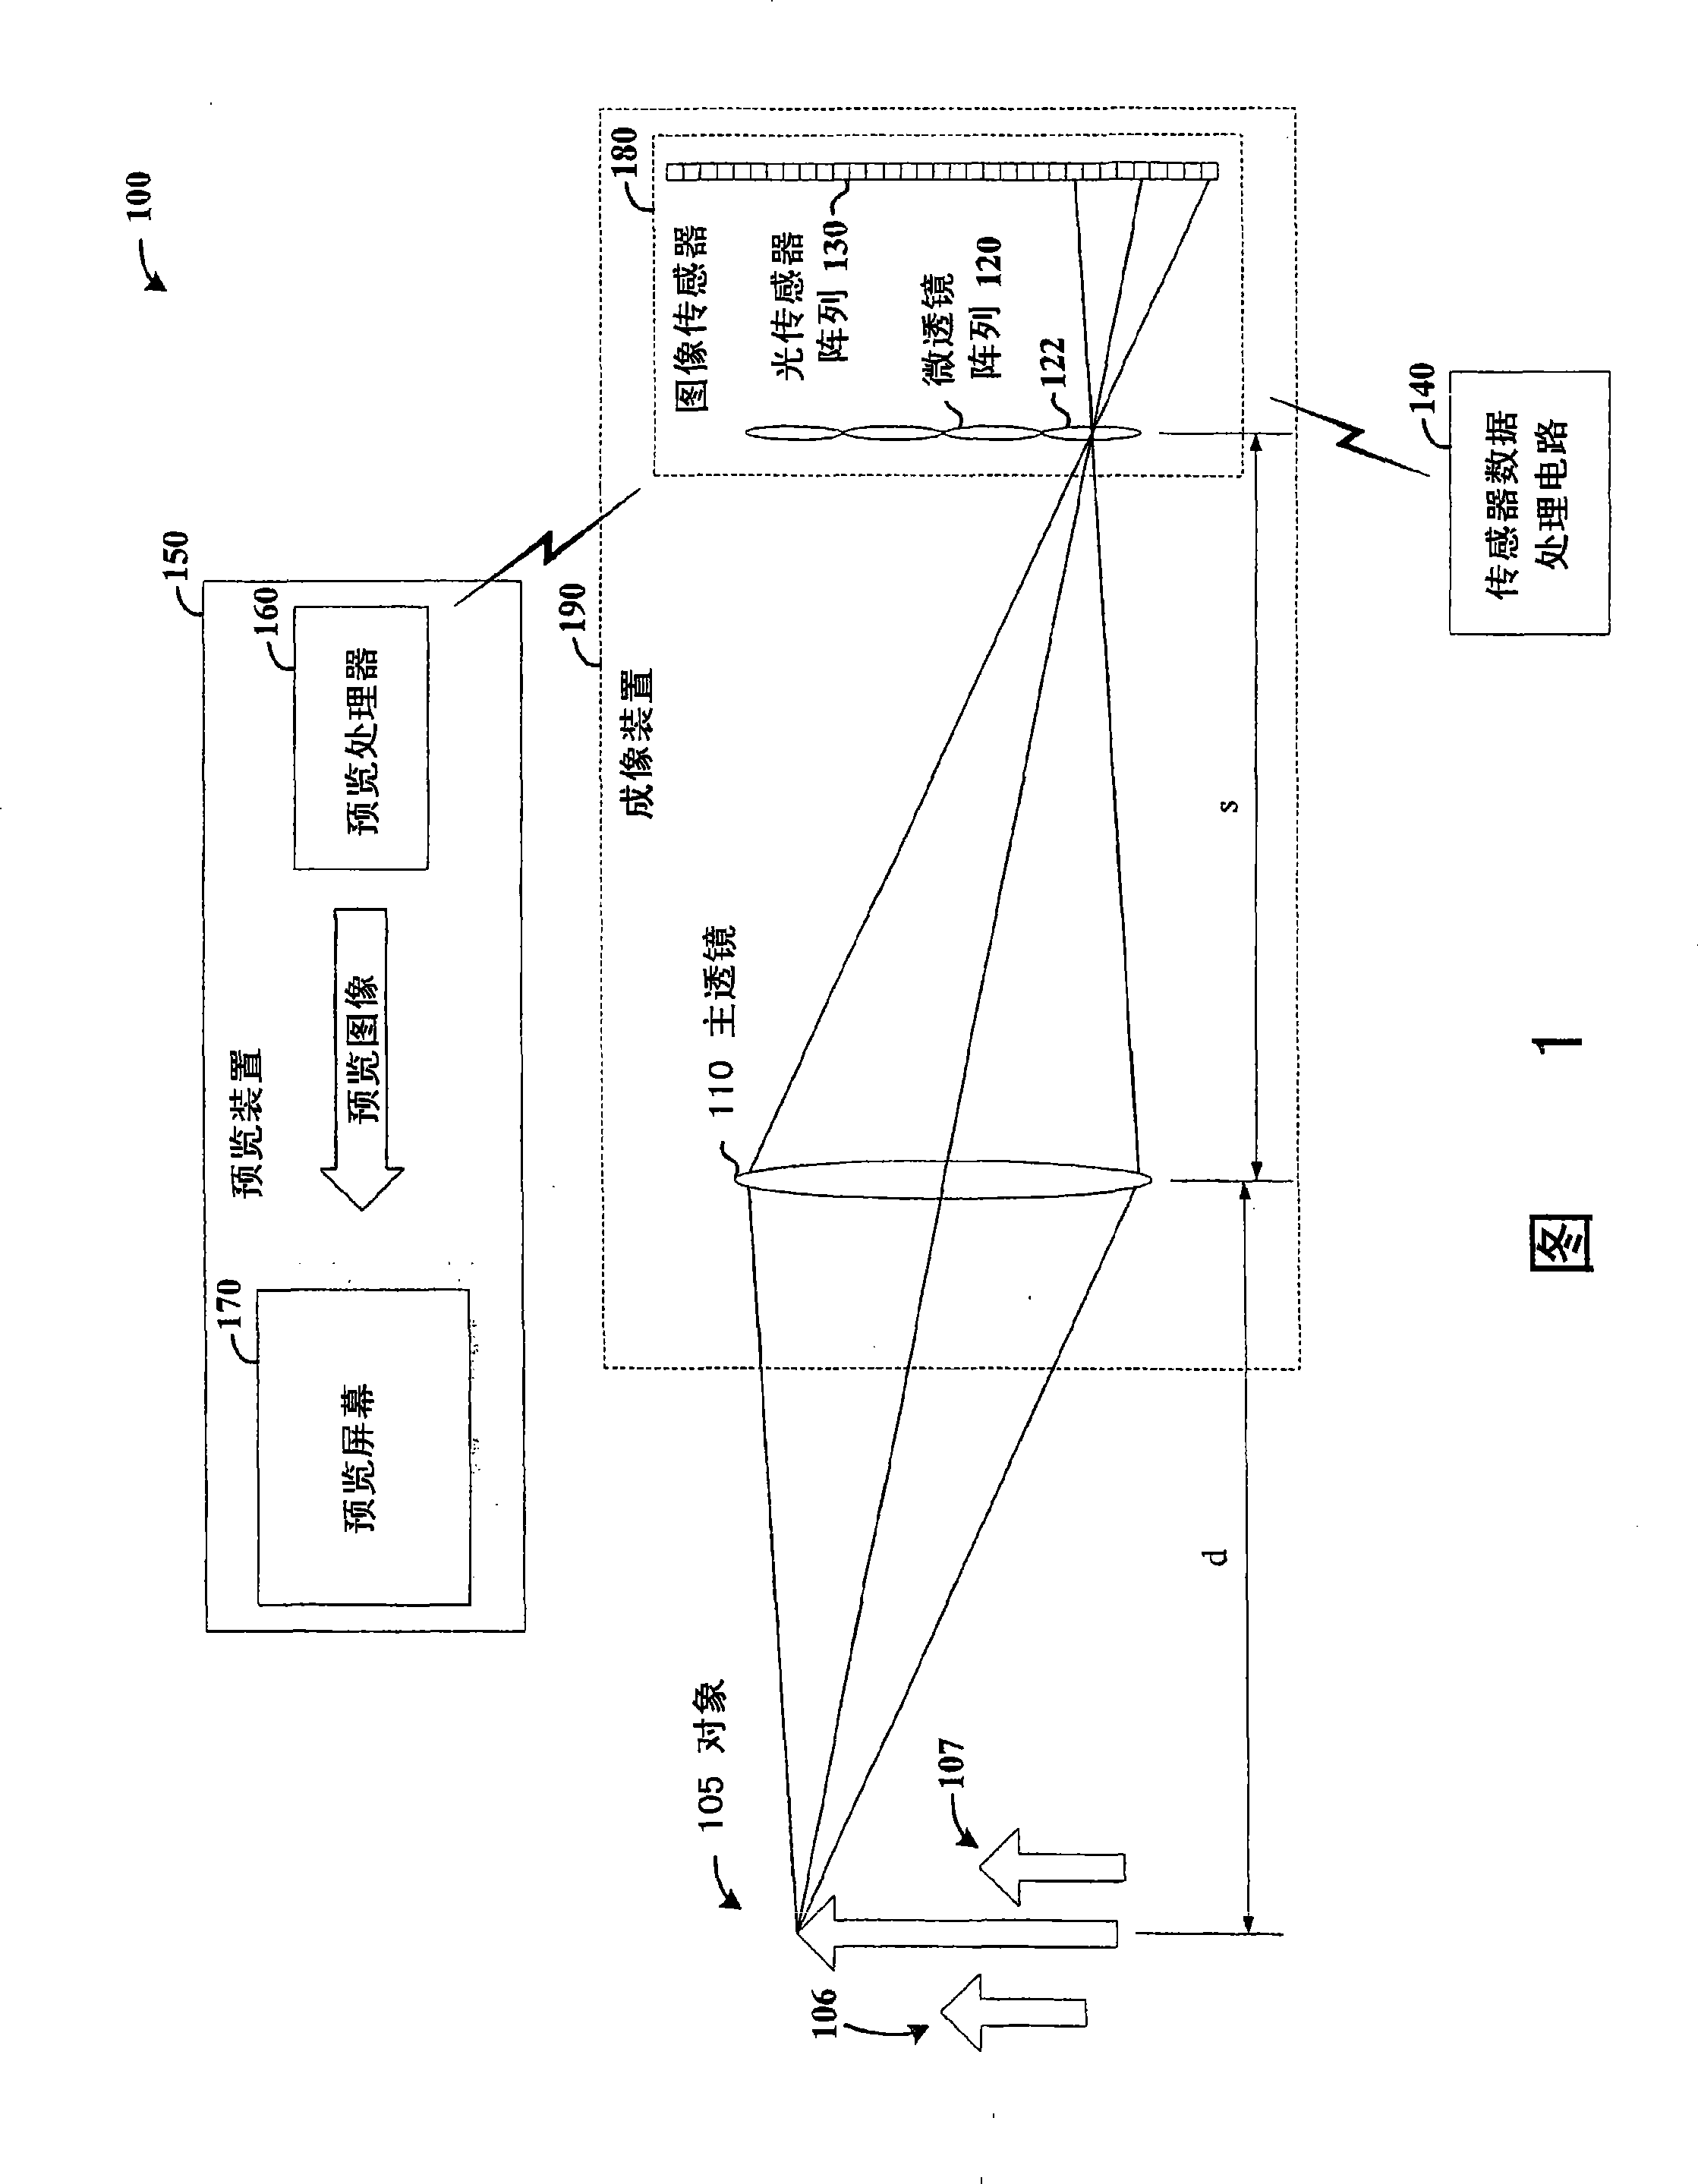 Imaging arrangements and methods therefor